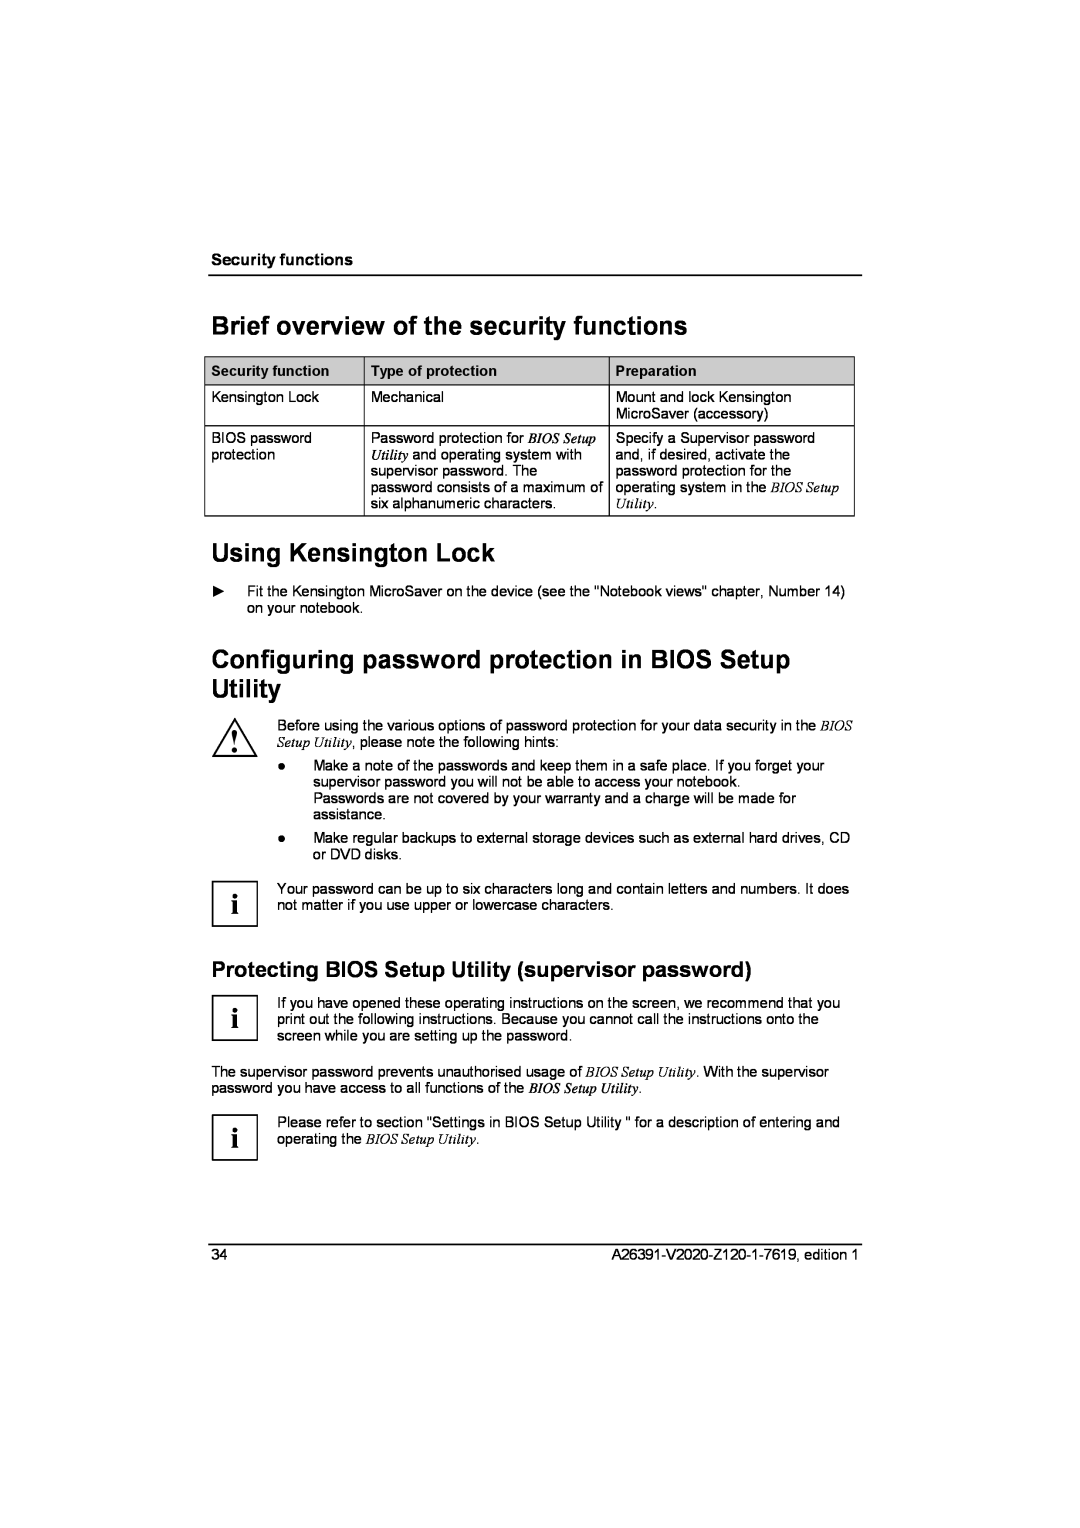 Fujitsu Siemens Computers V2020 manual Brief overview of the security functions, Using Kensington Lock, Security functions 